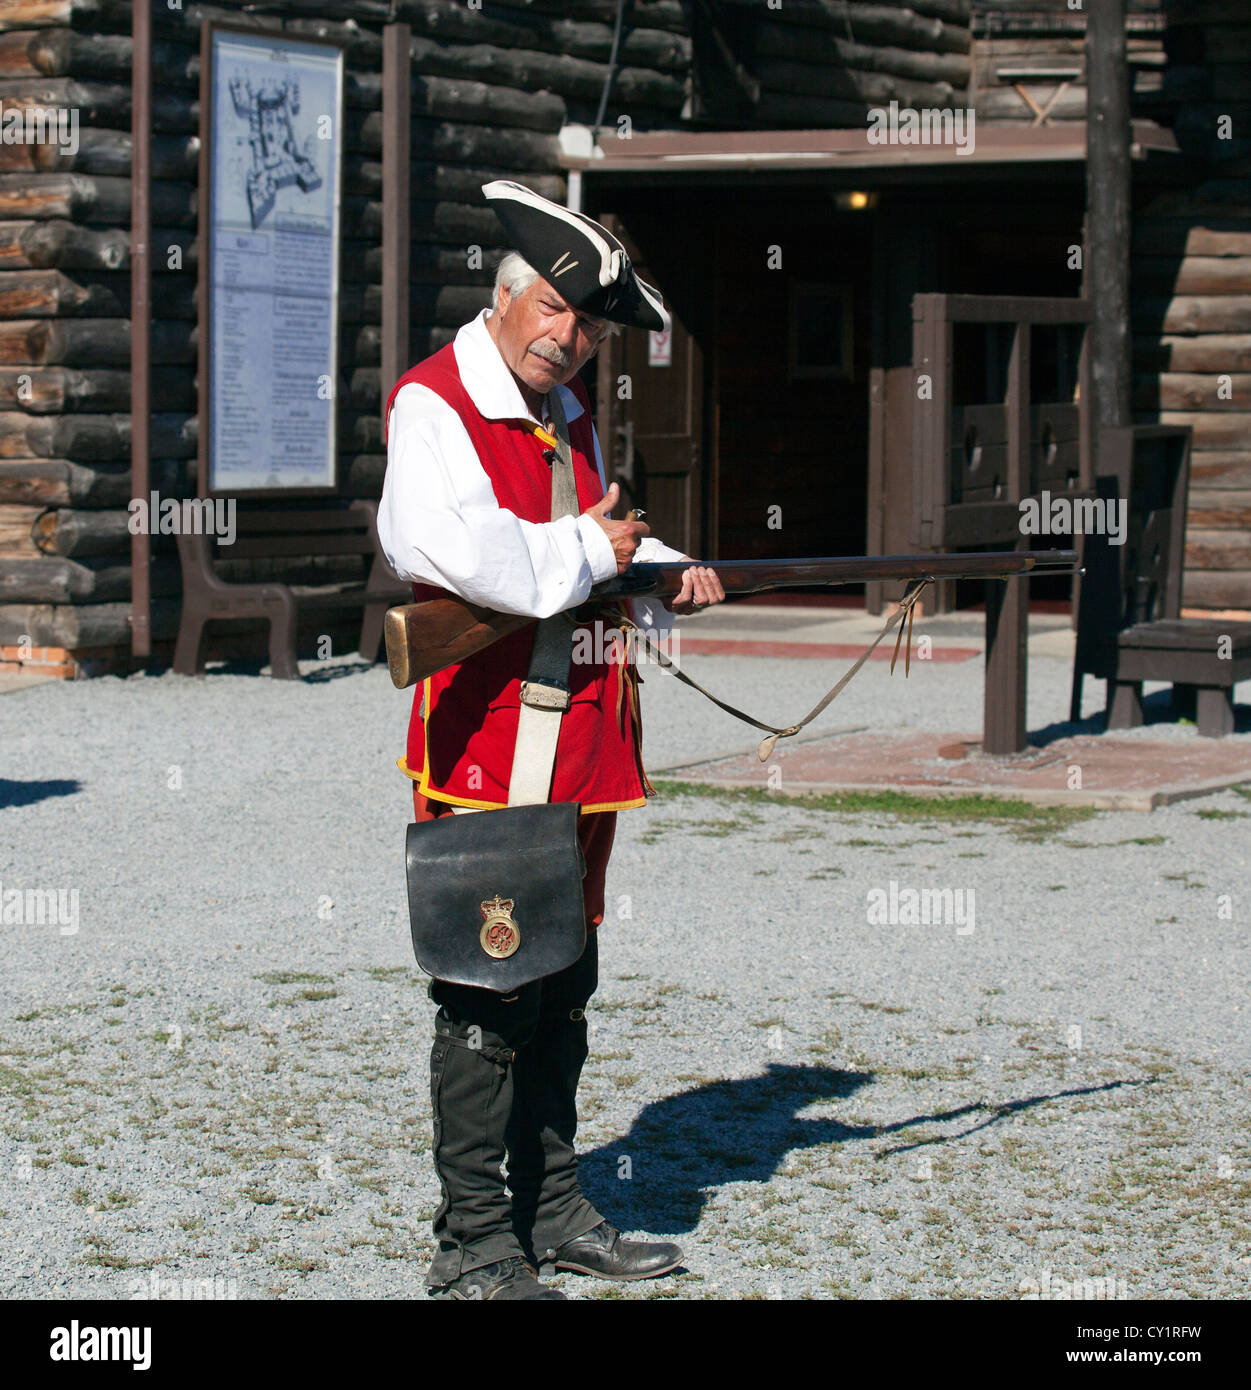 A British solder cocking his rifle brown bess at Fort William Henry New York. Stock Photo